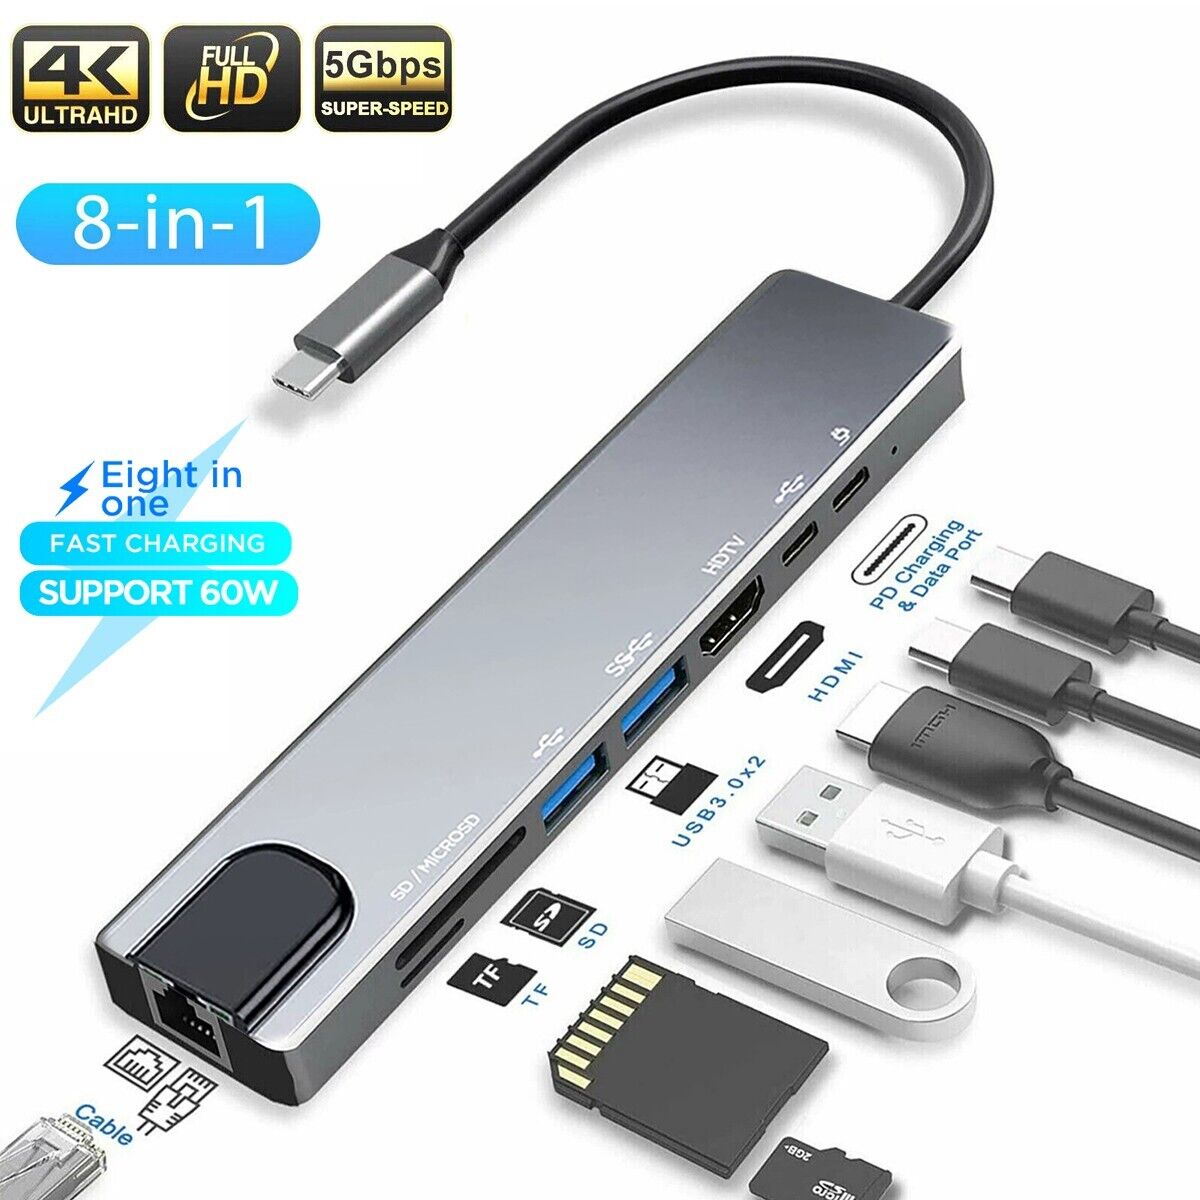 8in1 USB Type C Hub USB3.0 4K HDMI RJ45 SD/TF Dongle Adapter for Macbook Pro Air